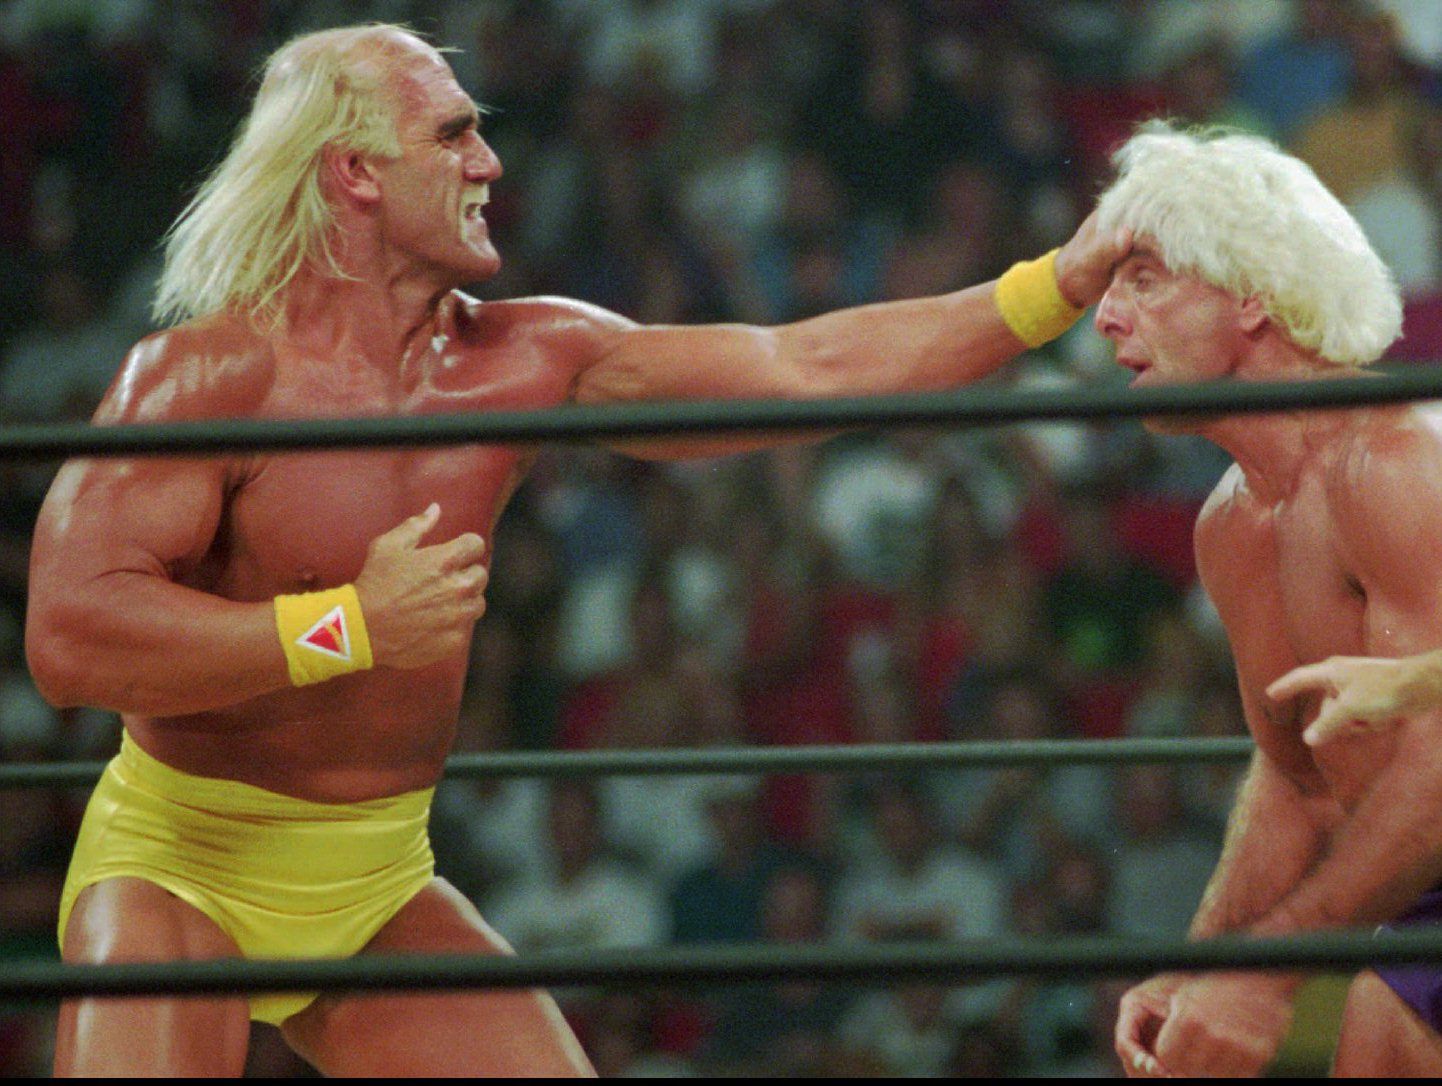 Hulk Hogan shares his thoughts on not having a WrestleMania match with Ric Flair